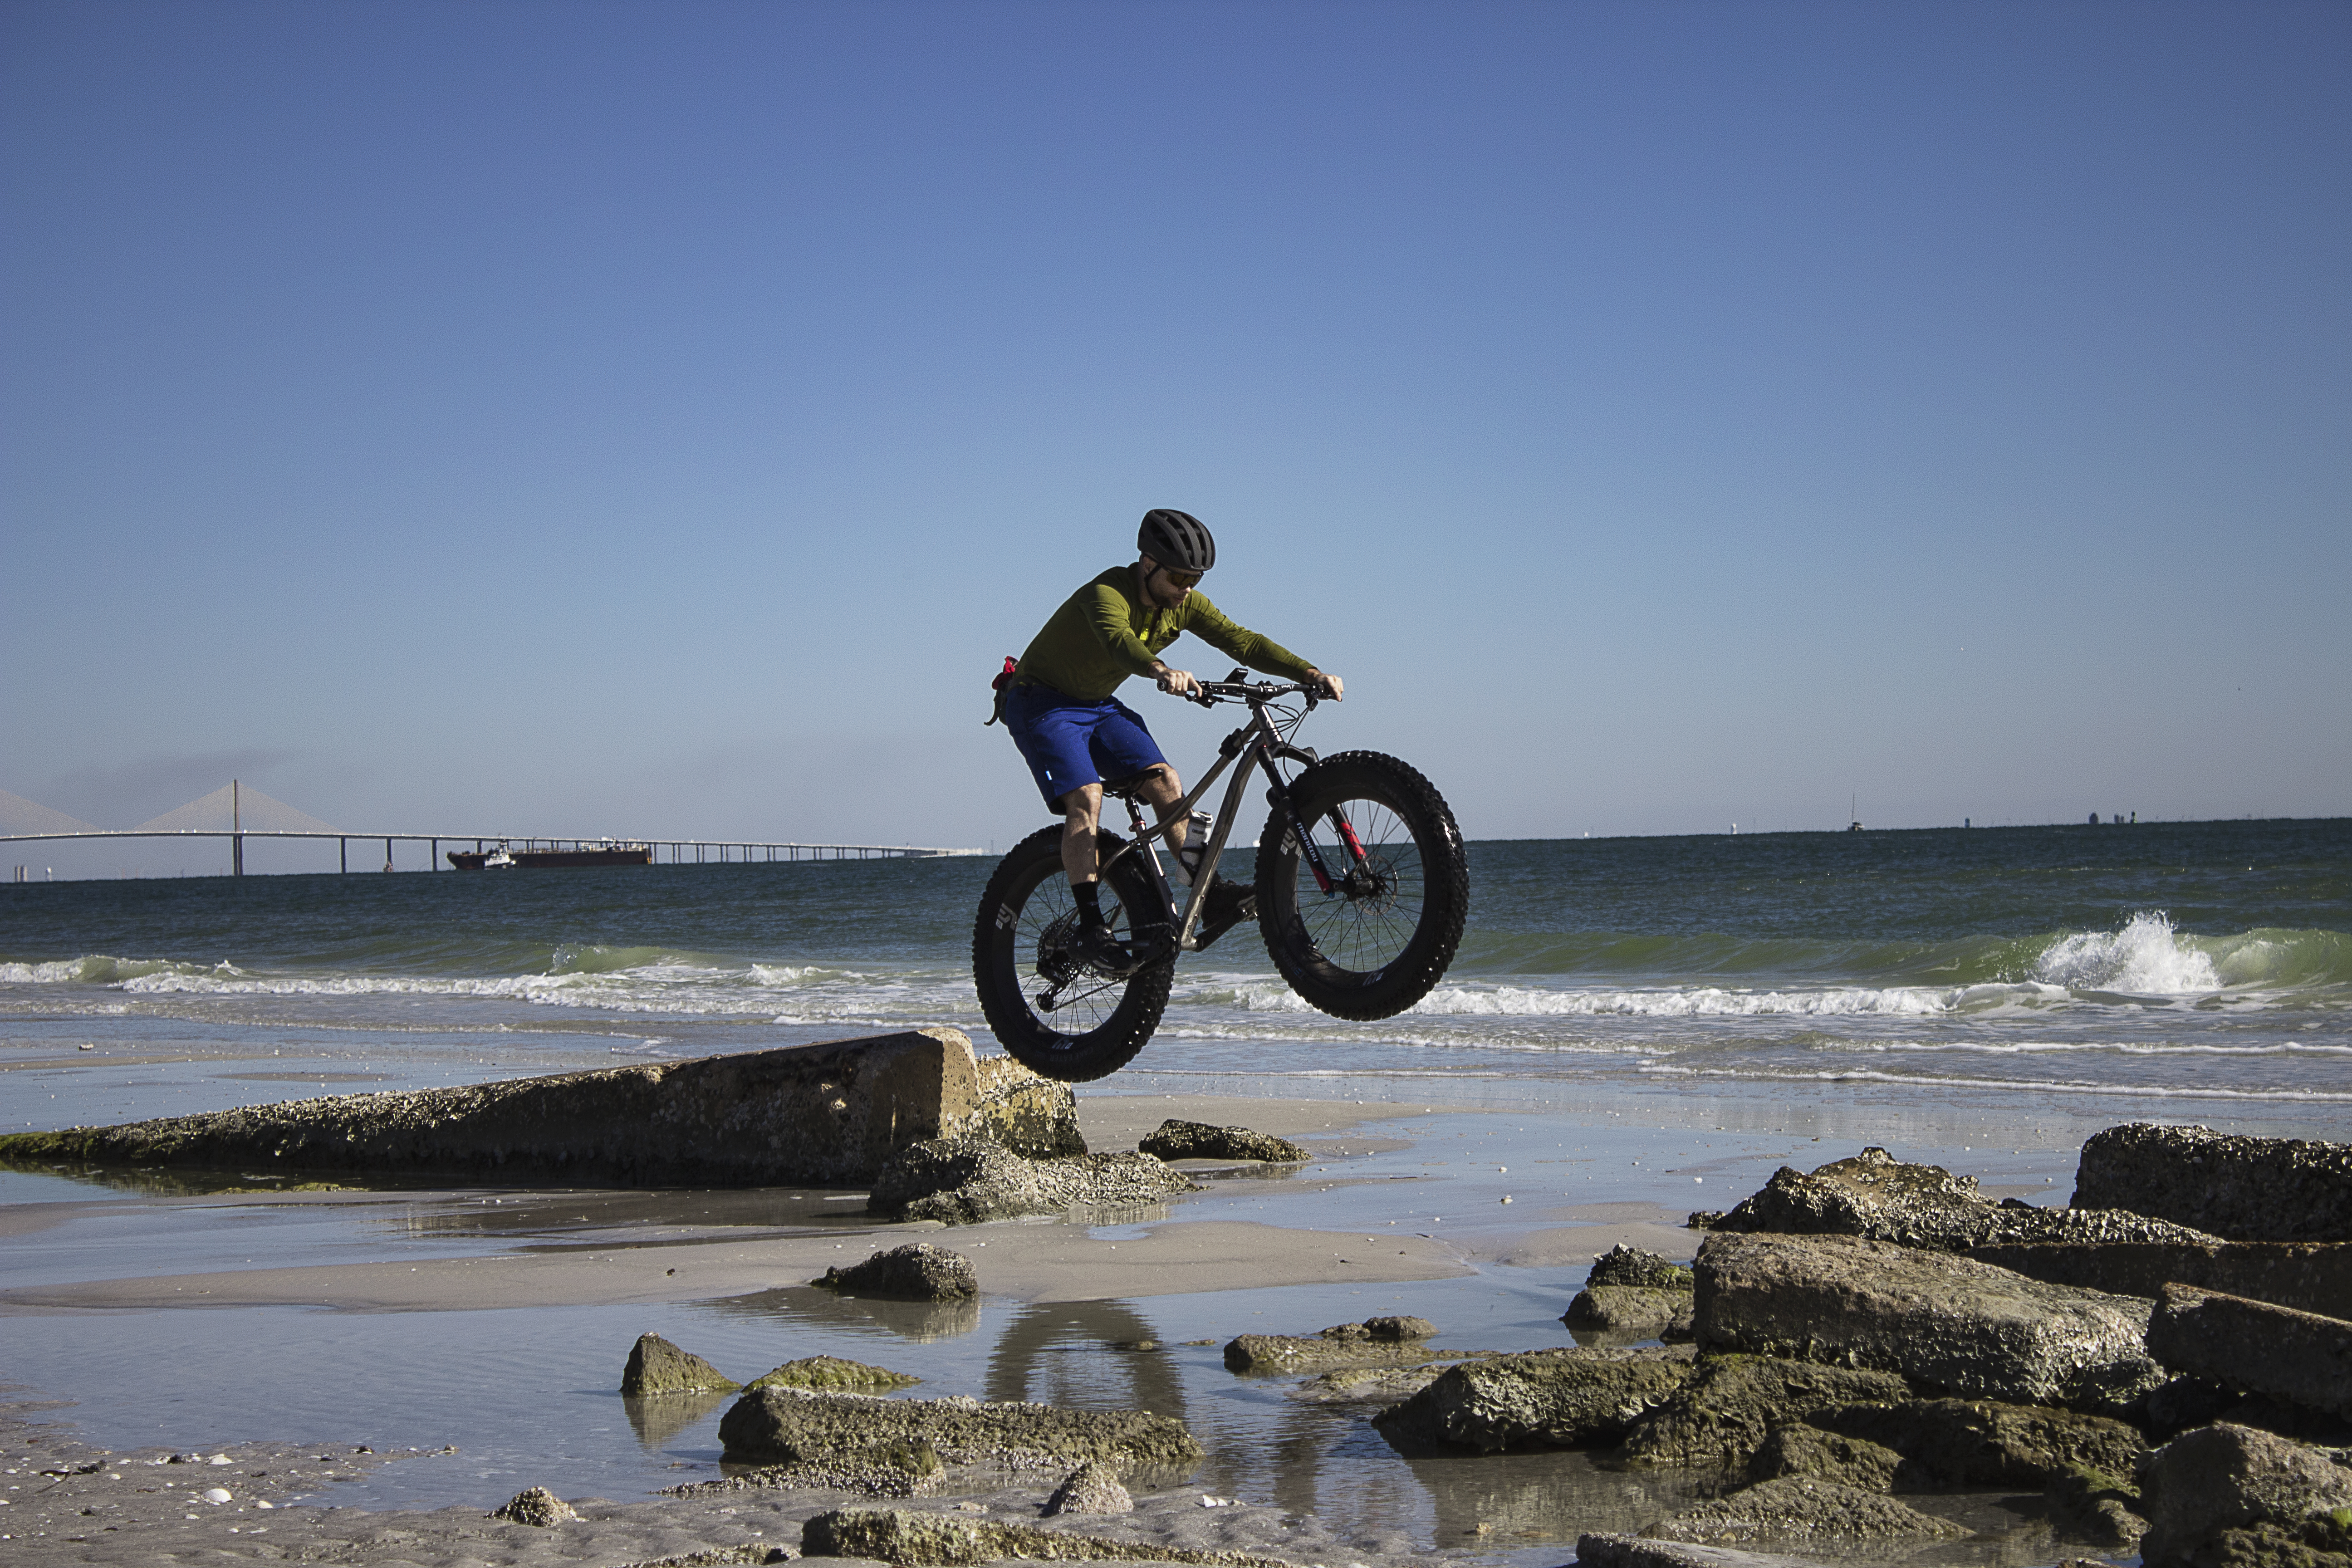 Review: Big is the perfect descriptor for Why Cycles’ Big Iron Fat Bike